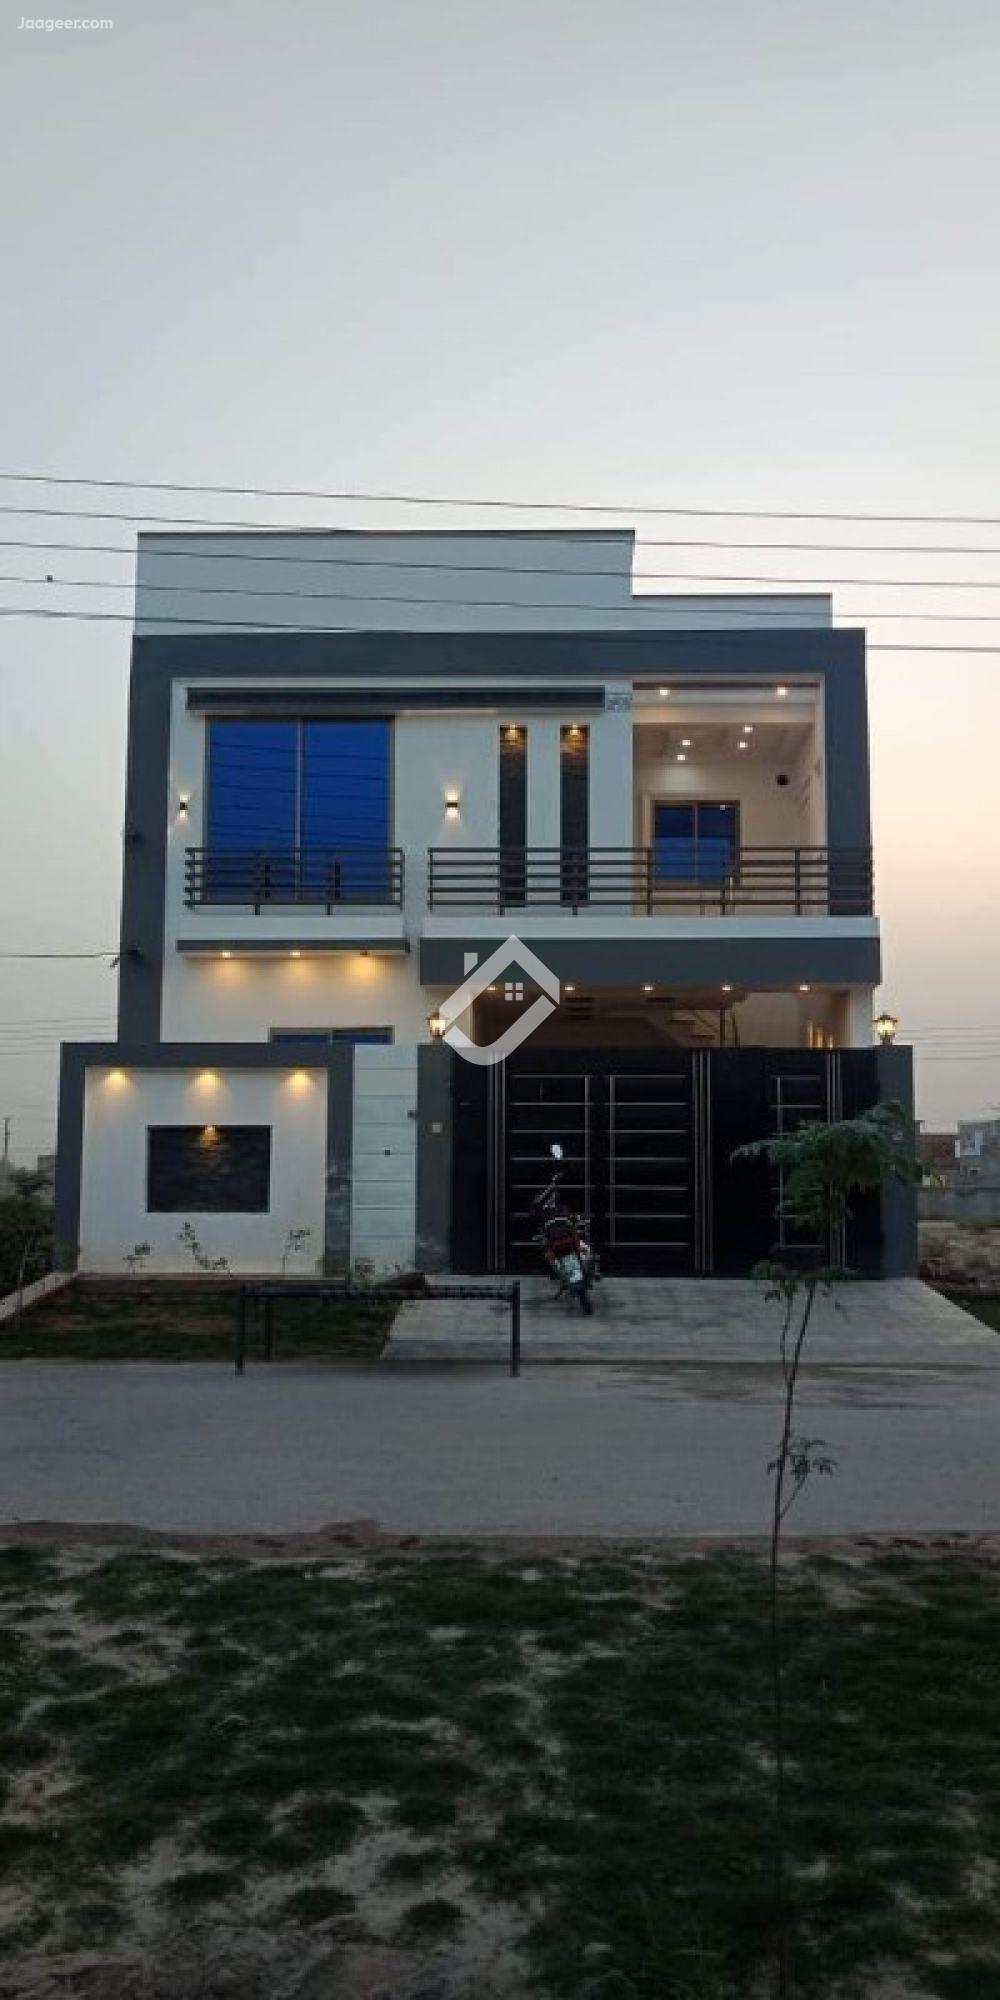 View  5 Marla Double Storey House For Sale In Fatima Jinnah Town in Fatima Jinnah Town, Multan